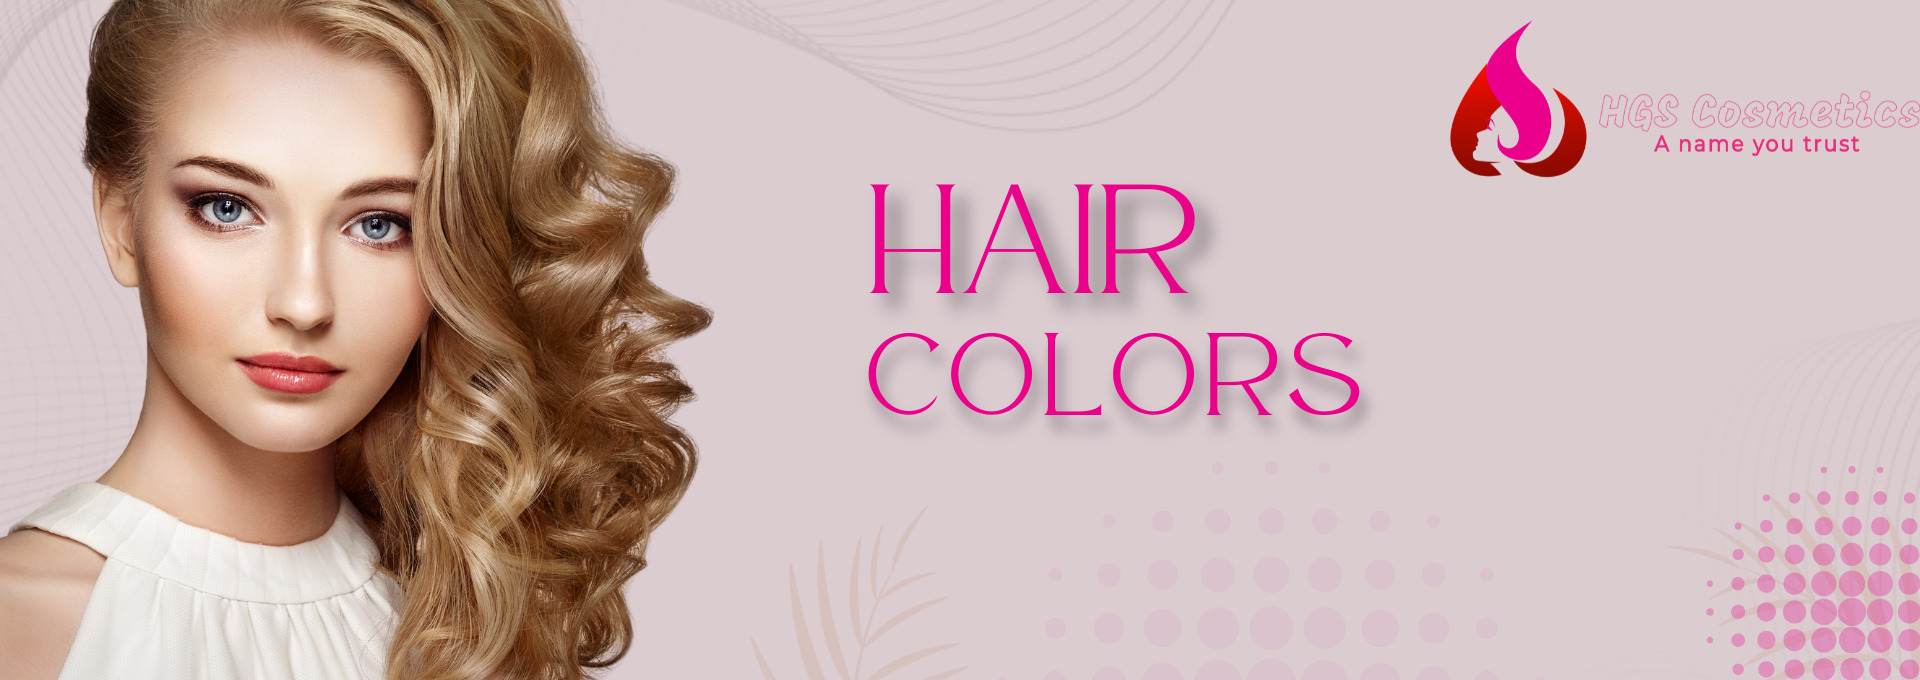 Shop Best Hair Colors products Online @ HGS Cosmetics